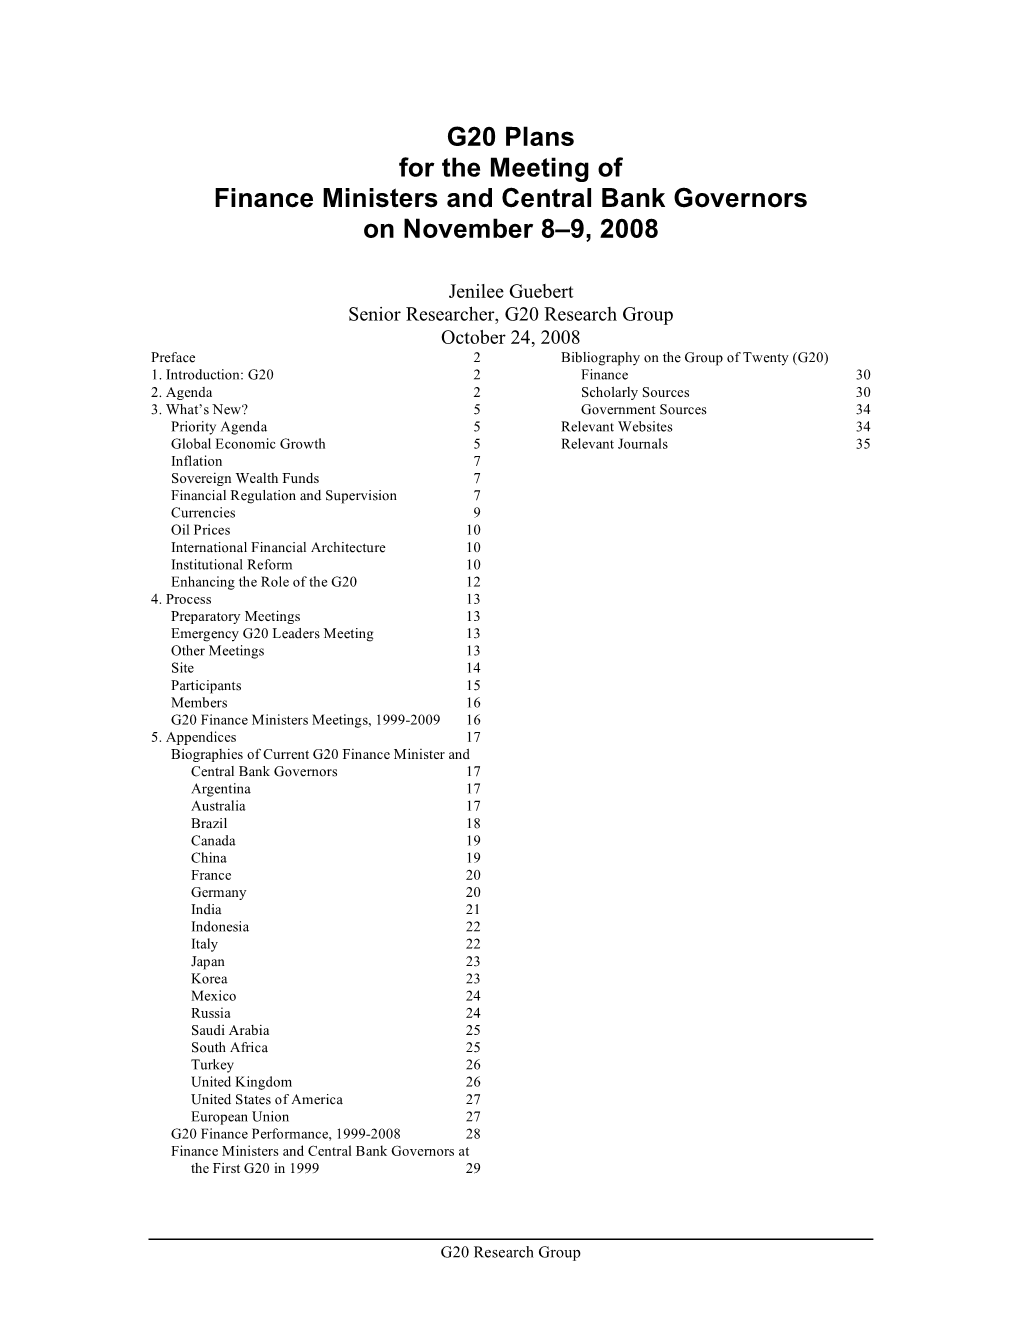 G20 Plans for the Meeting of Finance Ministers and Central Bank Governors on November 8–9, 2008